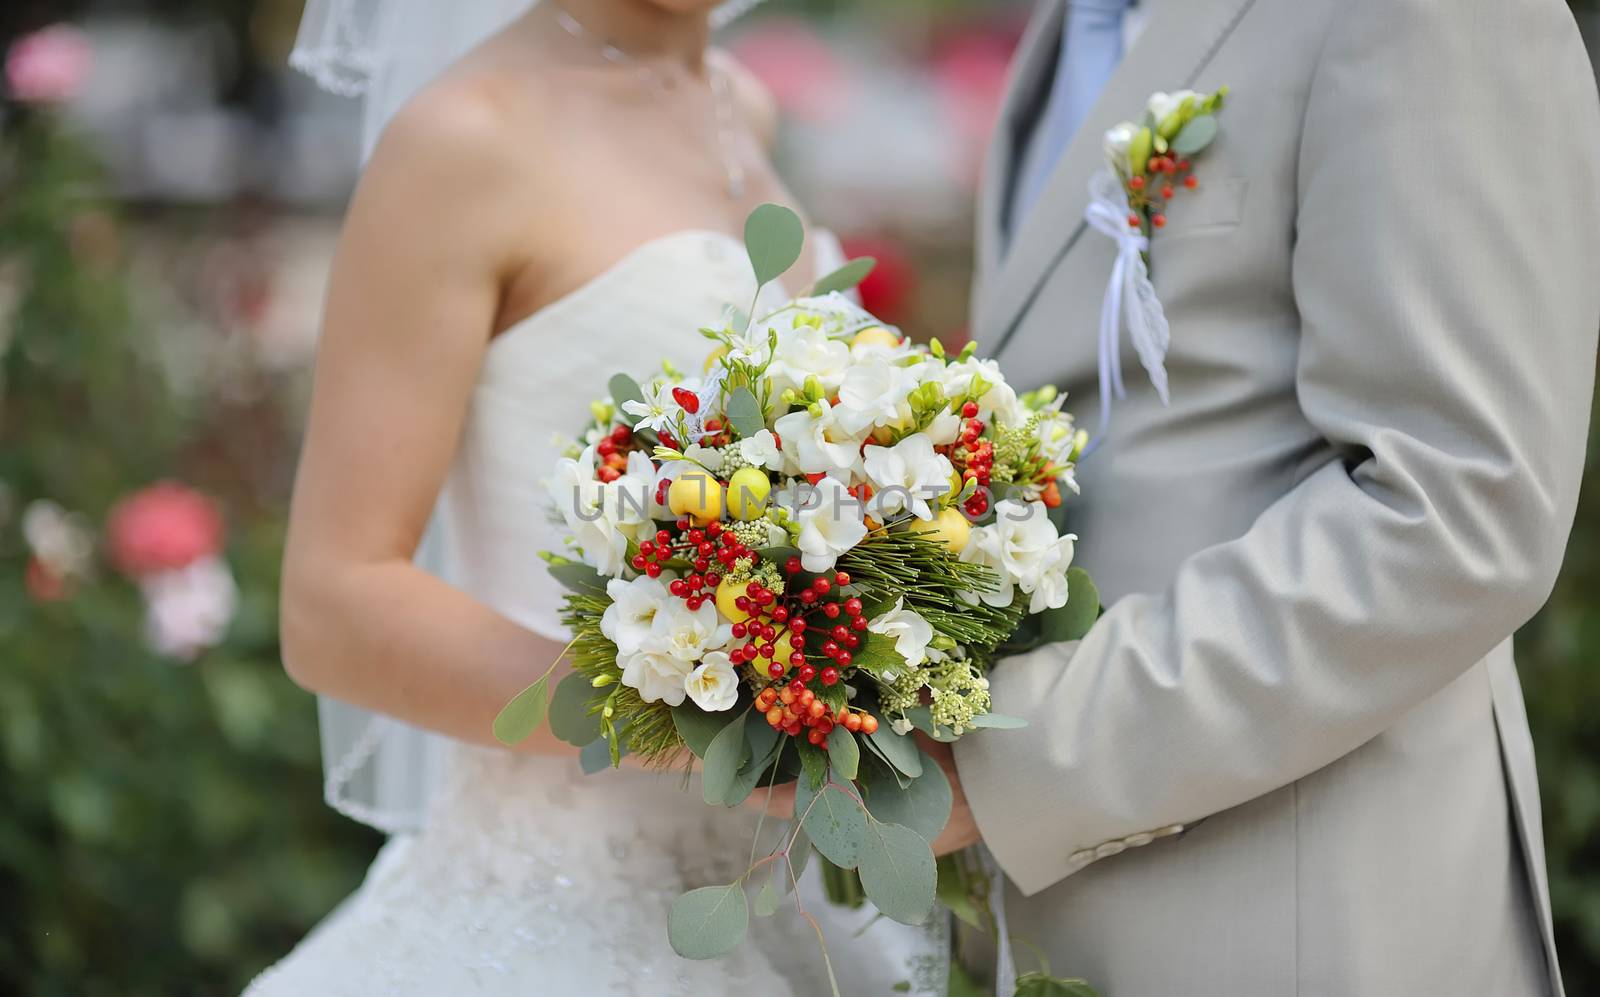 Bride holding wedding flower bouquet of white roses 